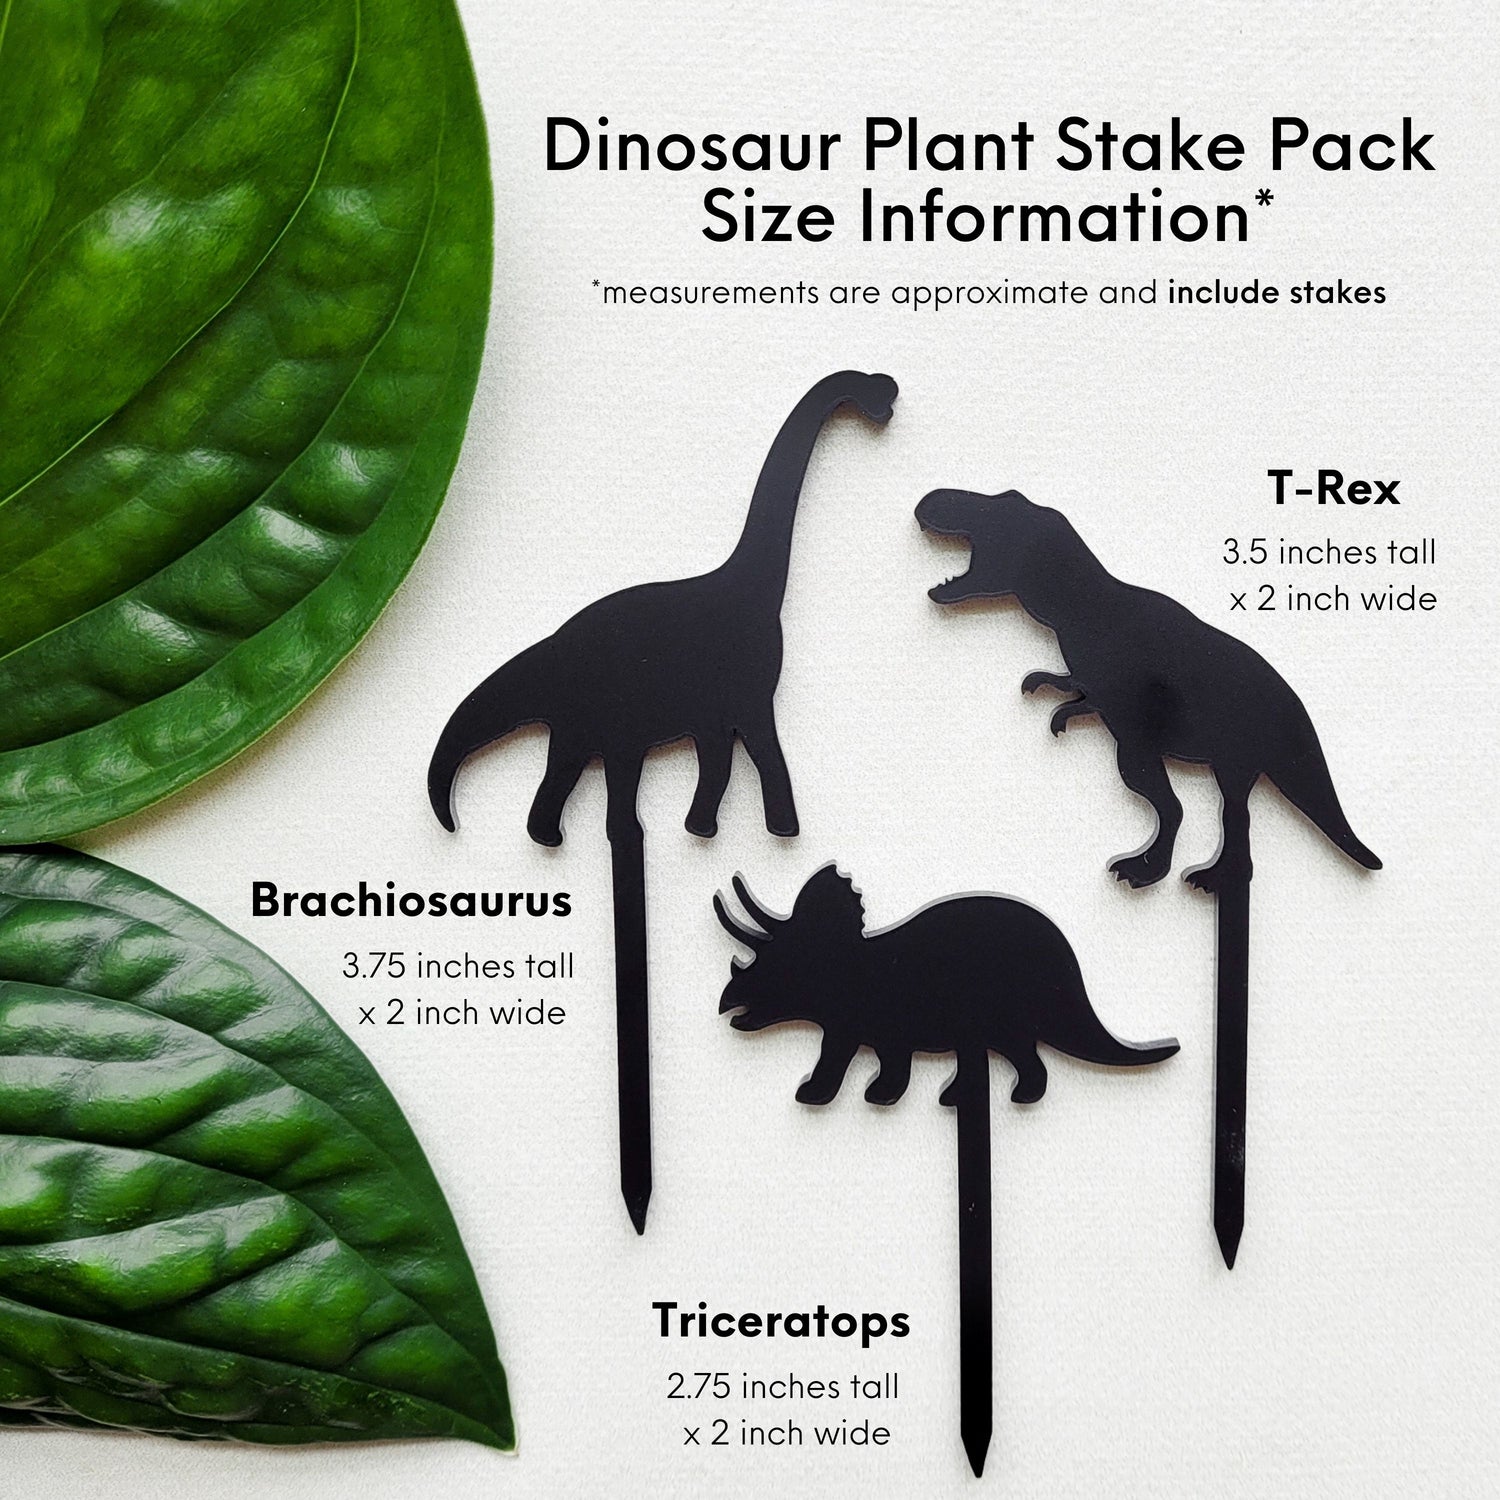 Mini dinosaur plant stakes on white background with size information that matches the written description.